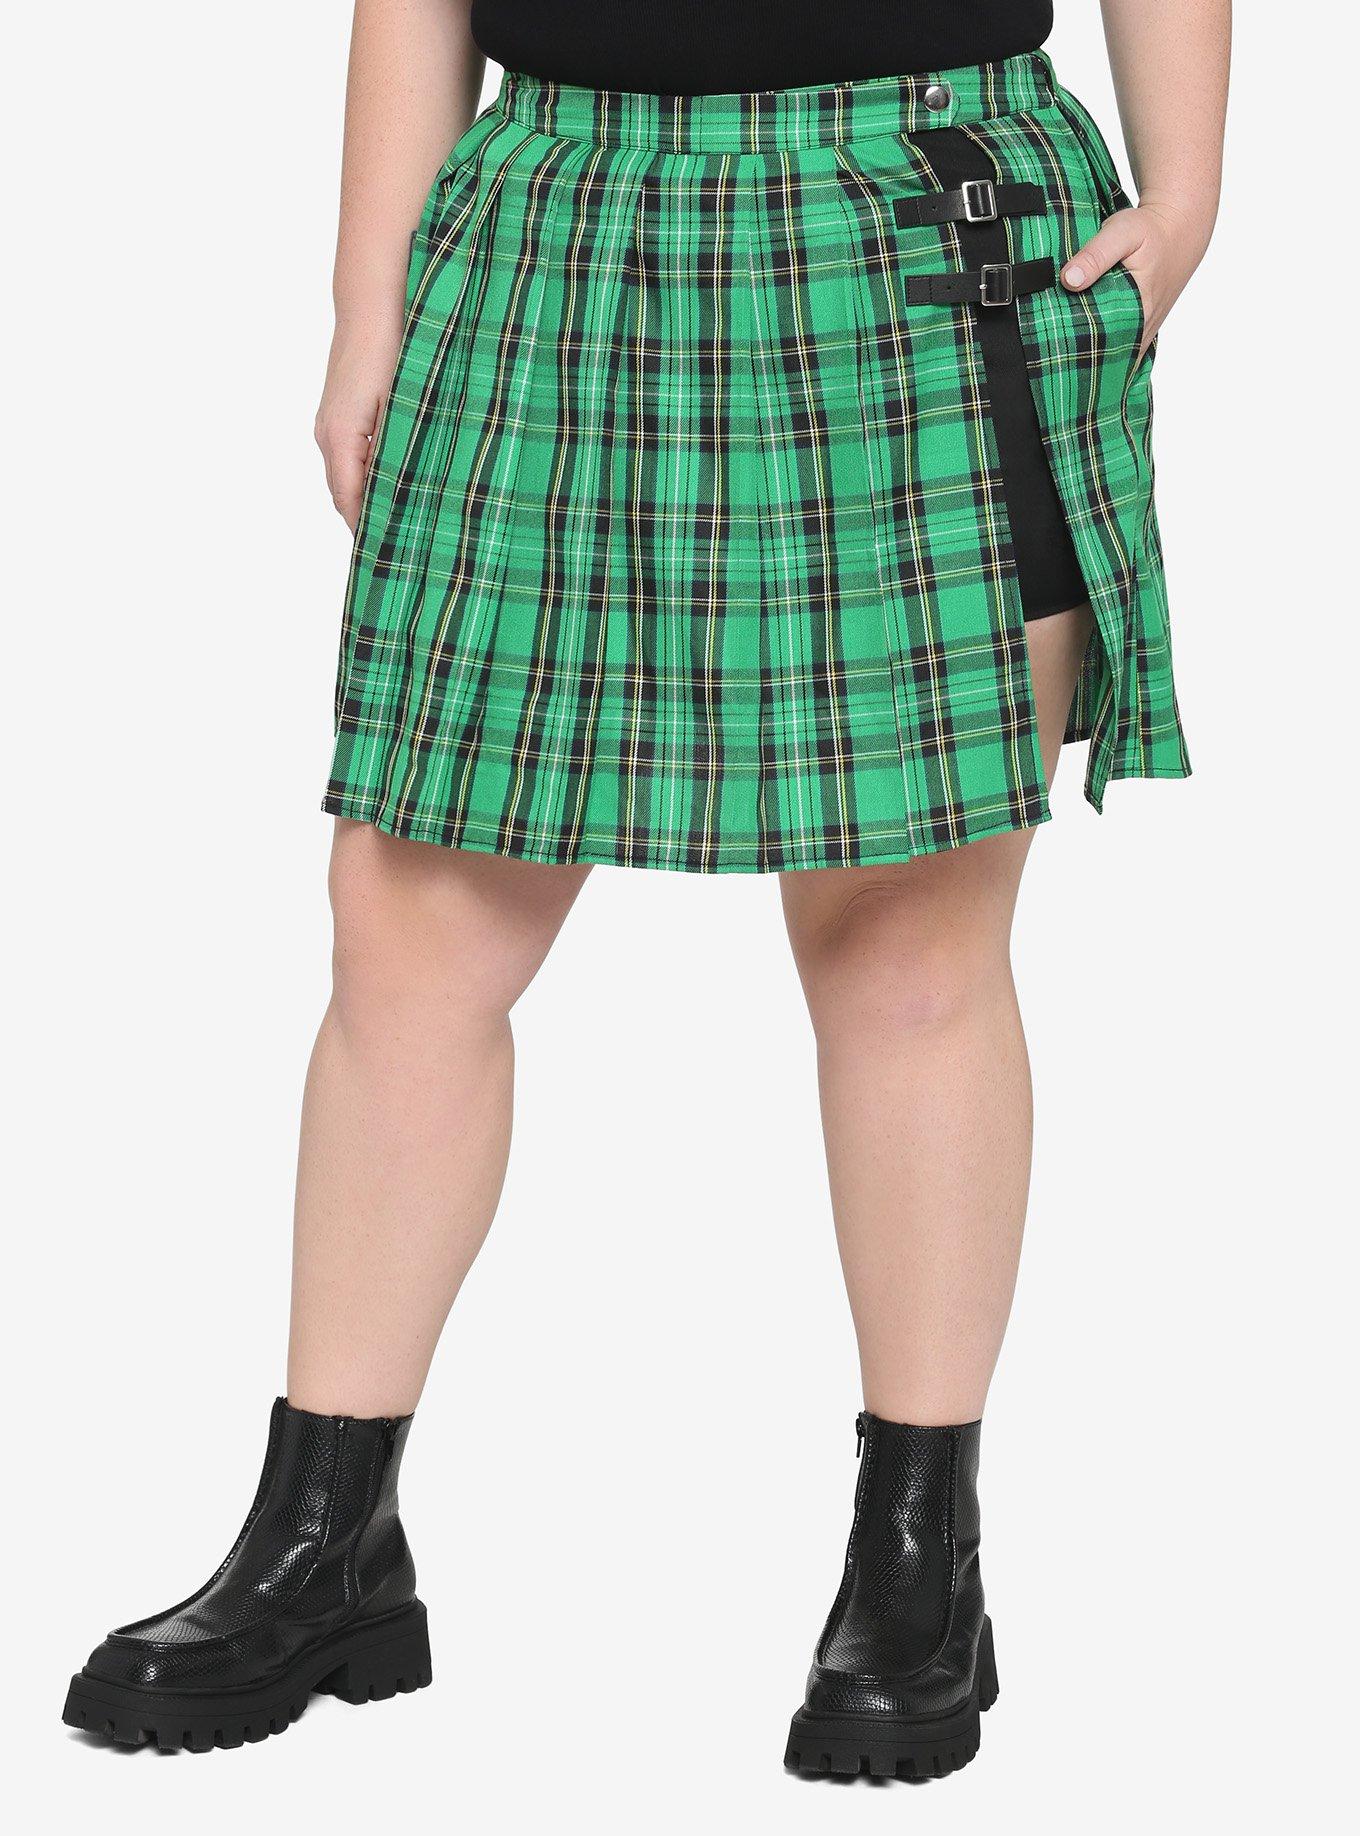 Green Plaid Buckle Pleated Skort Plus Size | Hot Topic